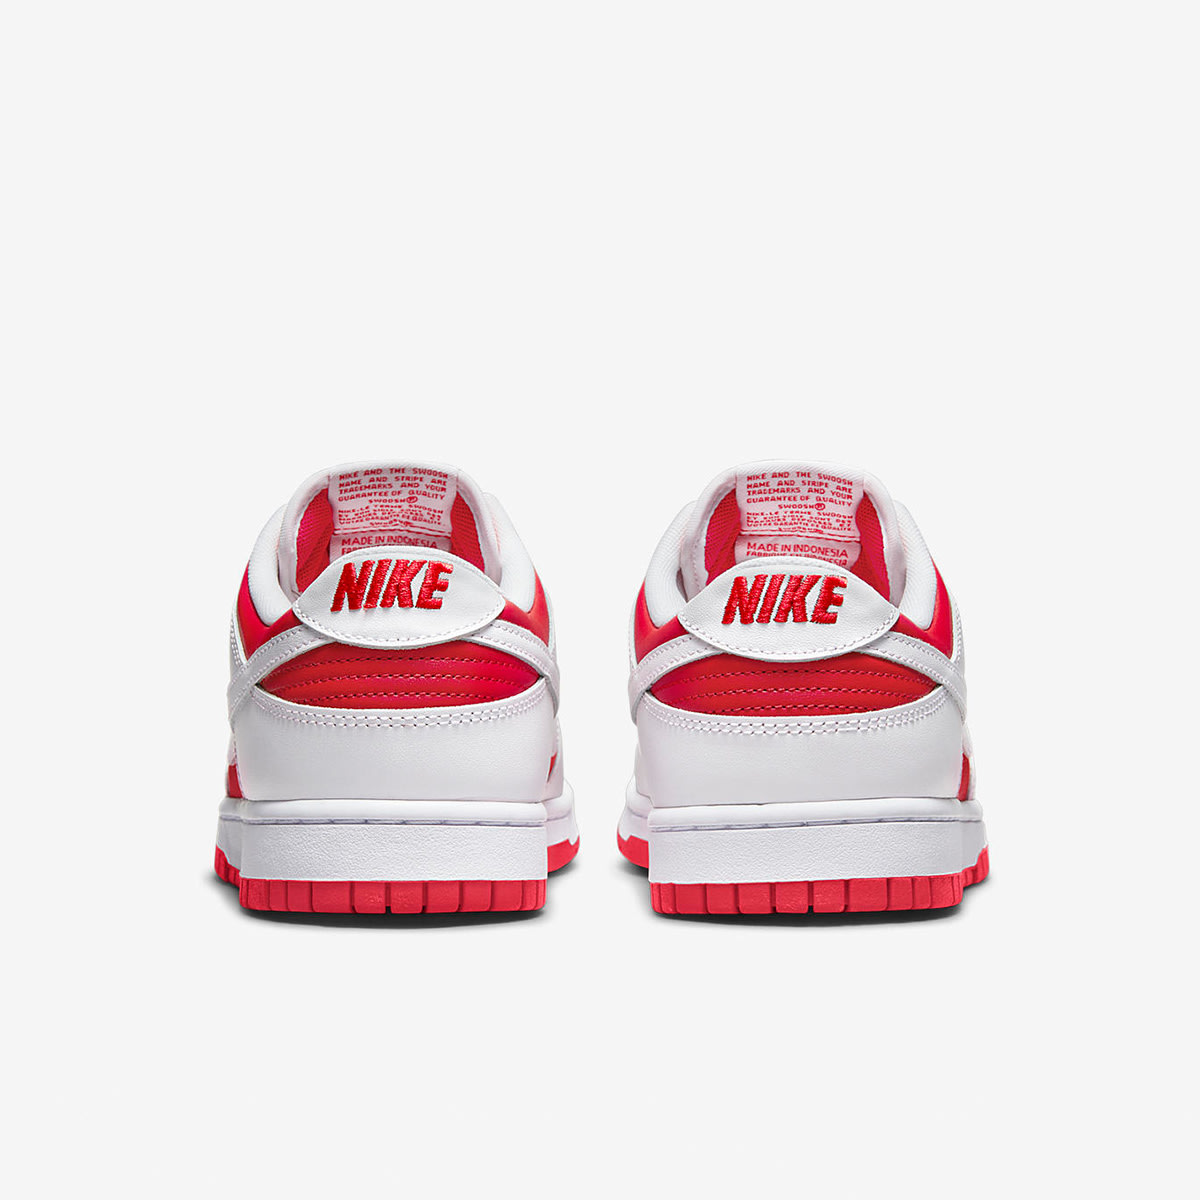 Nike Dunk Low Retro (Red, White & Orange) | END. Launches